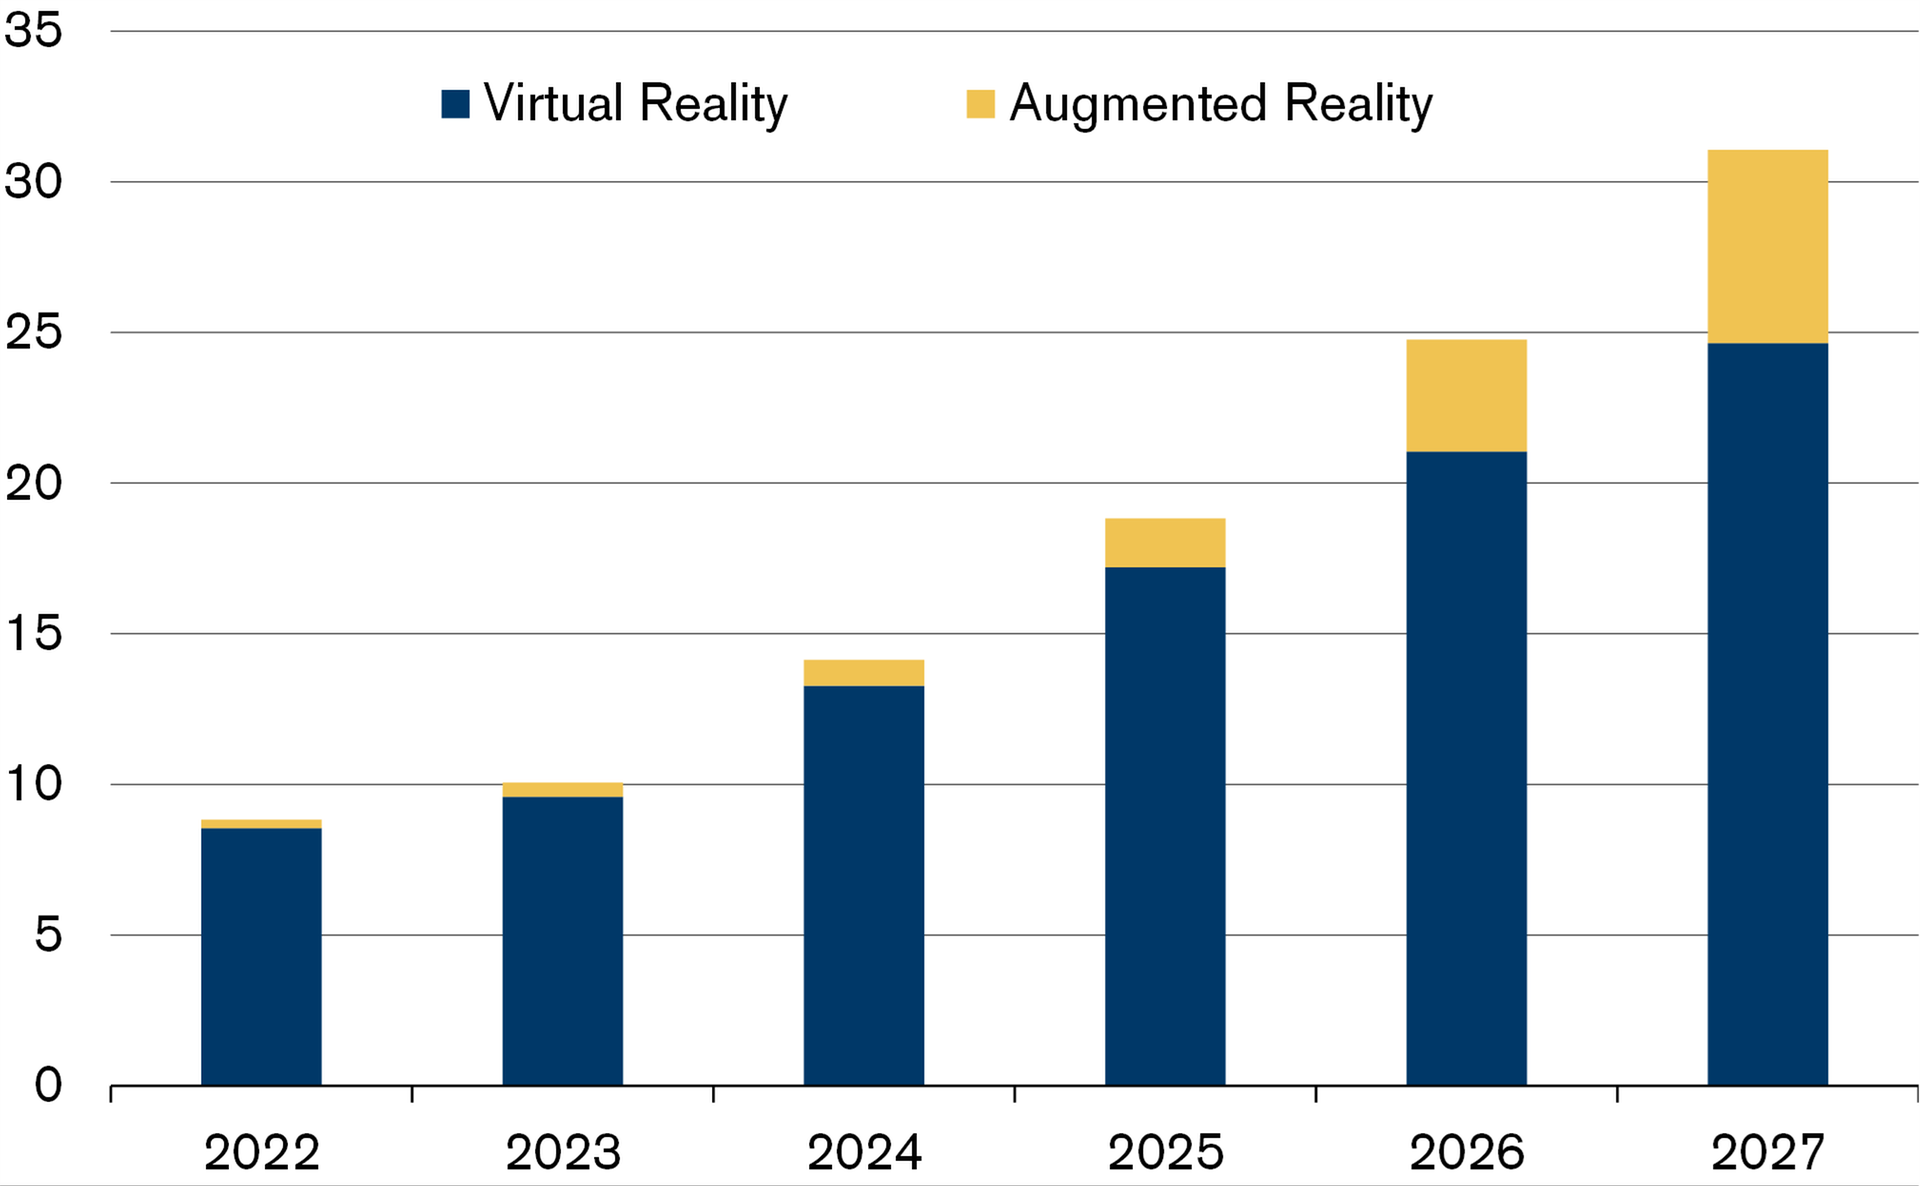 The number of VR and AR glasses sold will increase